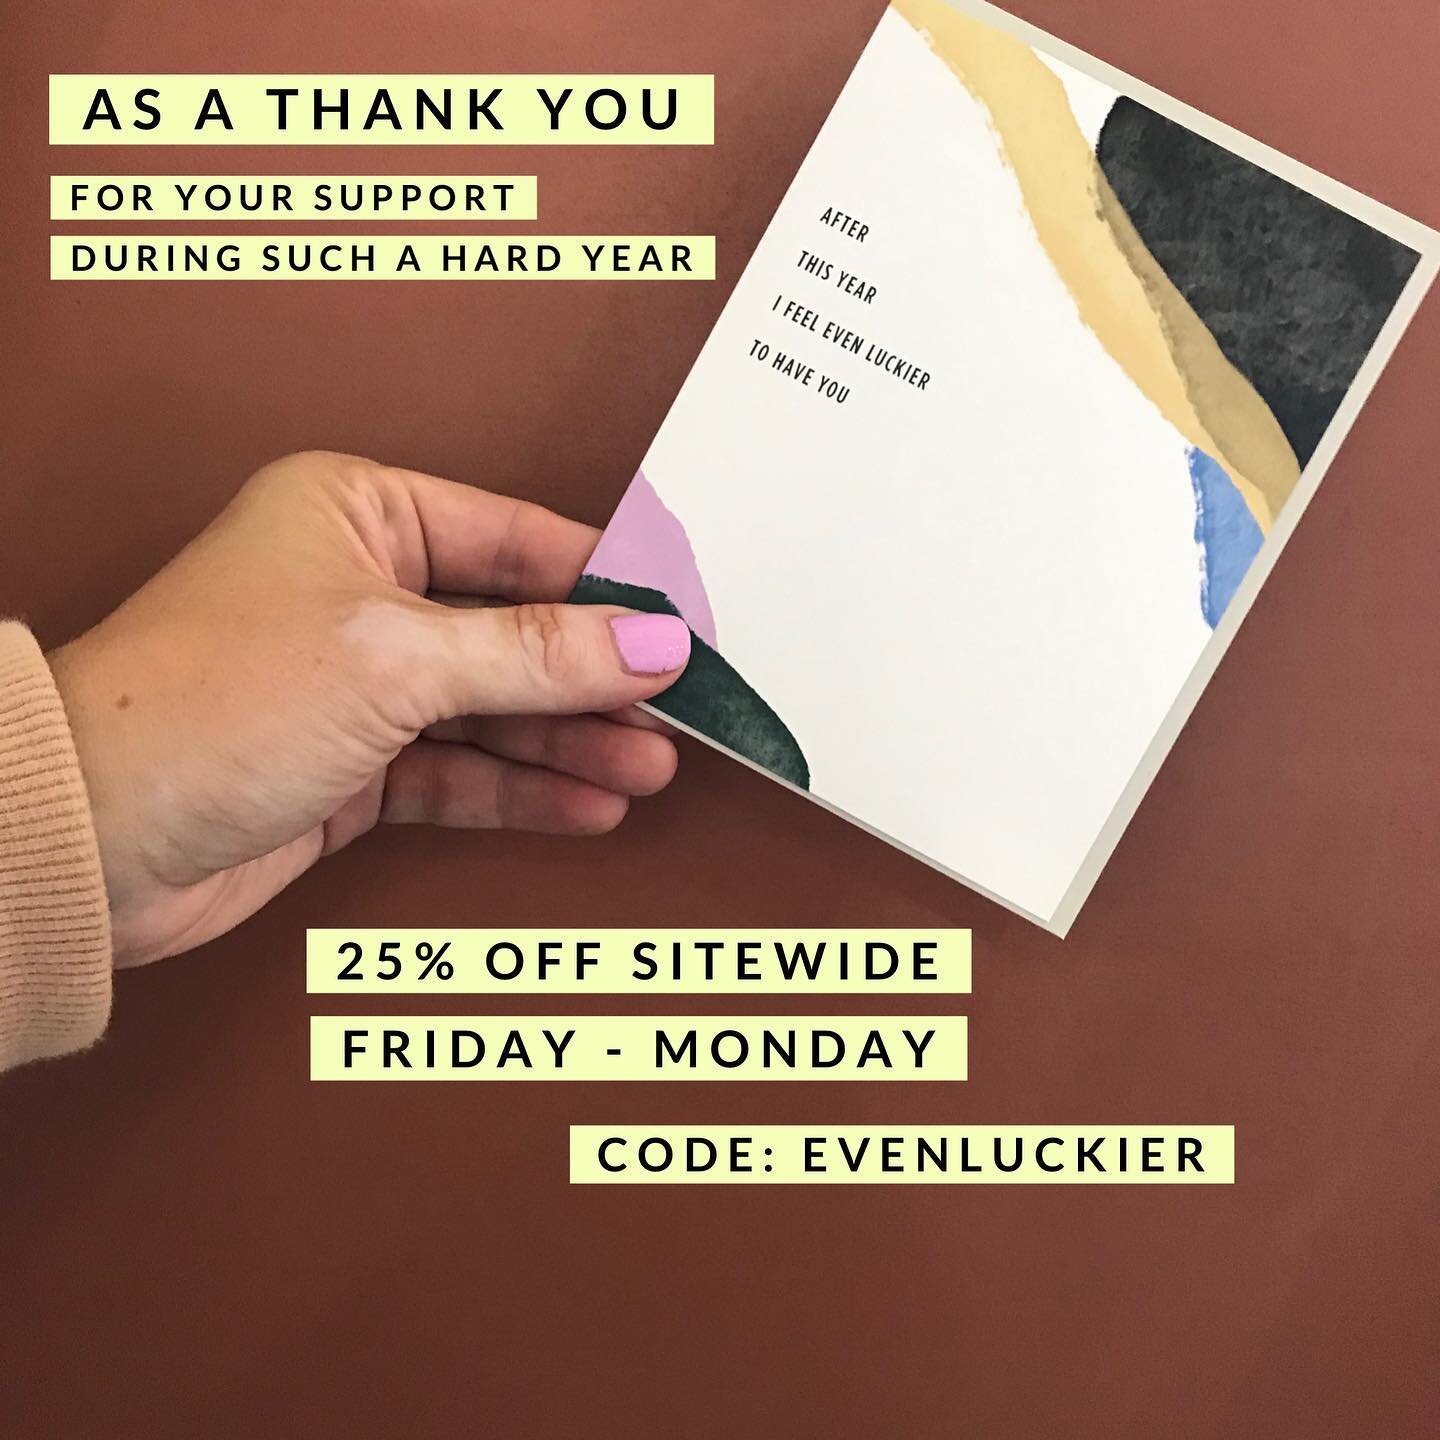 I feel even luckier to have your support after this year! As a thank you I am having a sale all weekend. I am forever grateful.